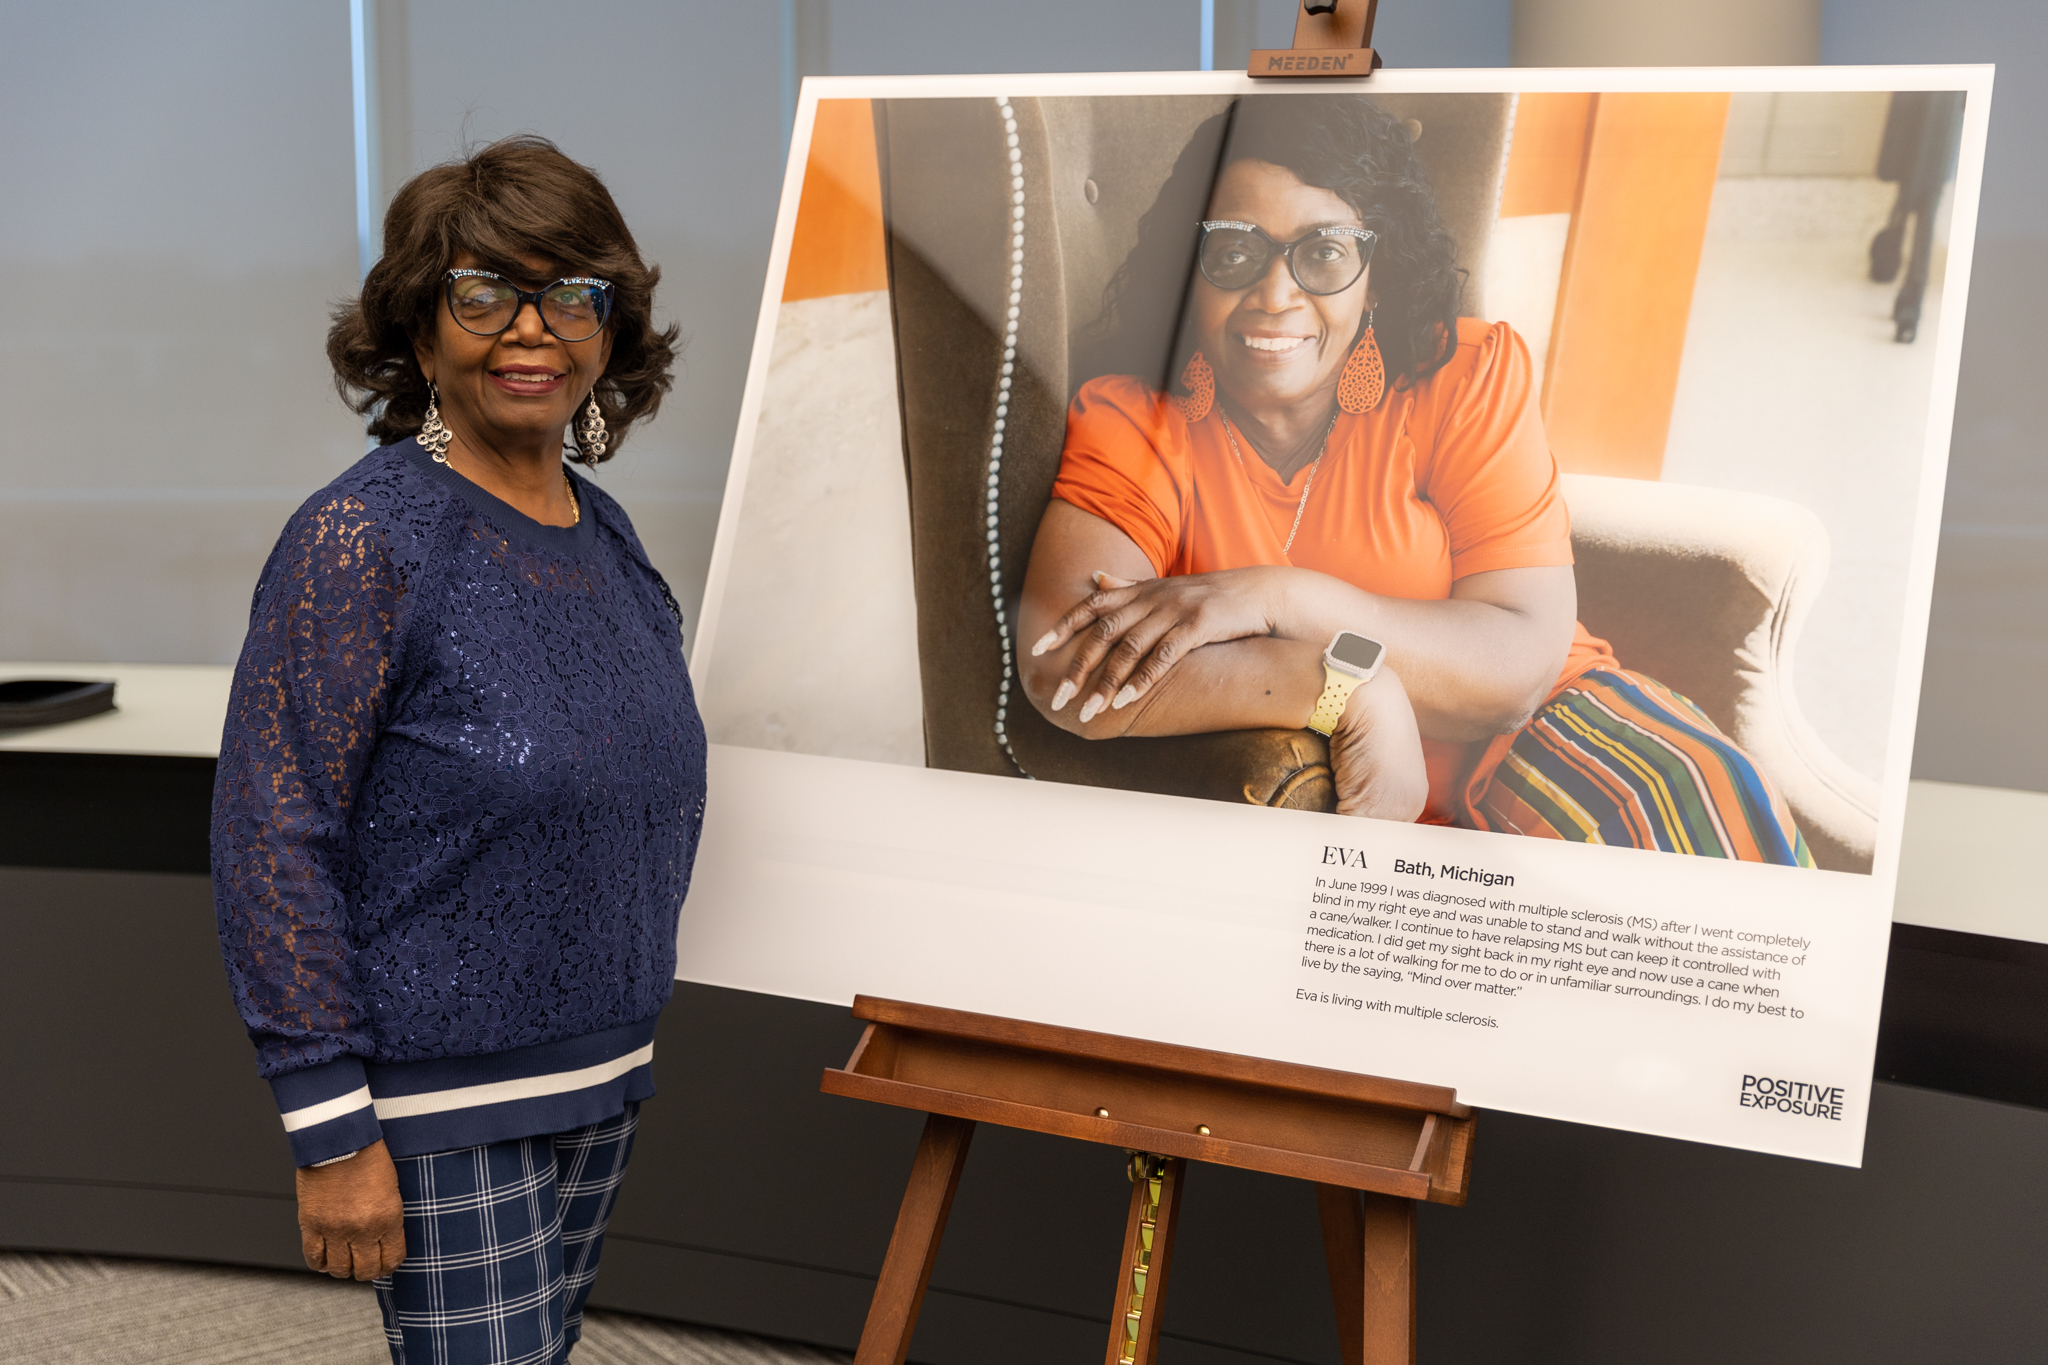 Eva, an older Black woman wearing a sparkly blue lace top and rhinestone-studded cat-eye glasses, smiles as she stands next to a large portrait of herself set on an easel. In the portrait, she's wearing the same glasses but with a bright orange top and orange earrings.